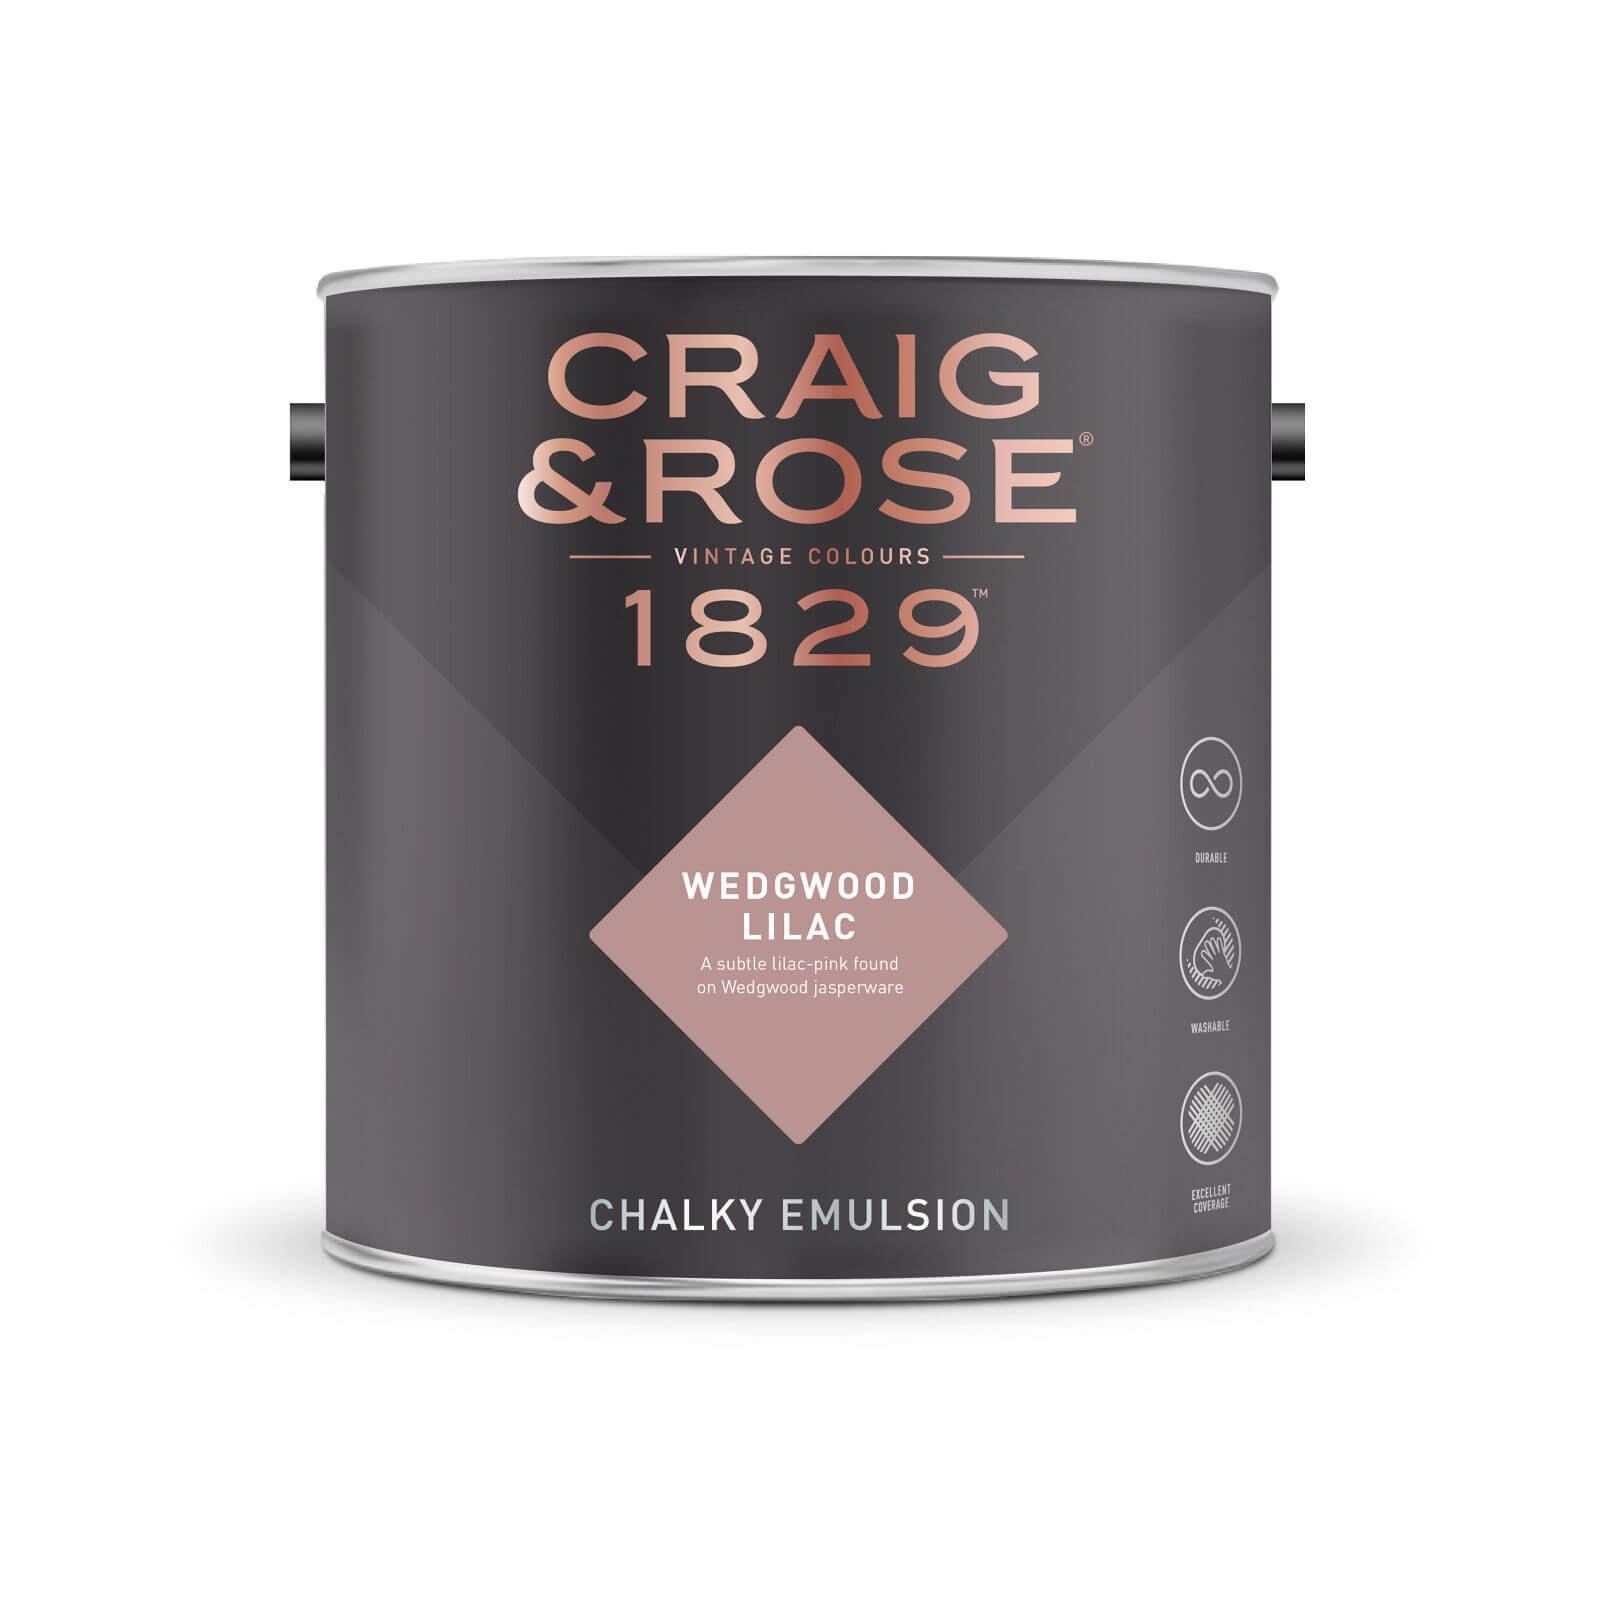 Craig & Rose 1829 Chalky Emulsion Paint Wedgwood Lilac - 5L